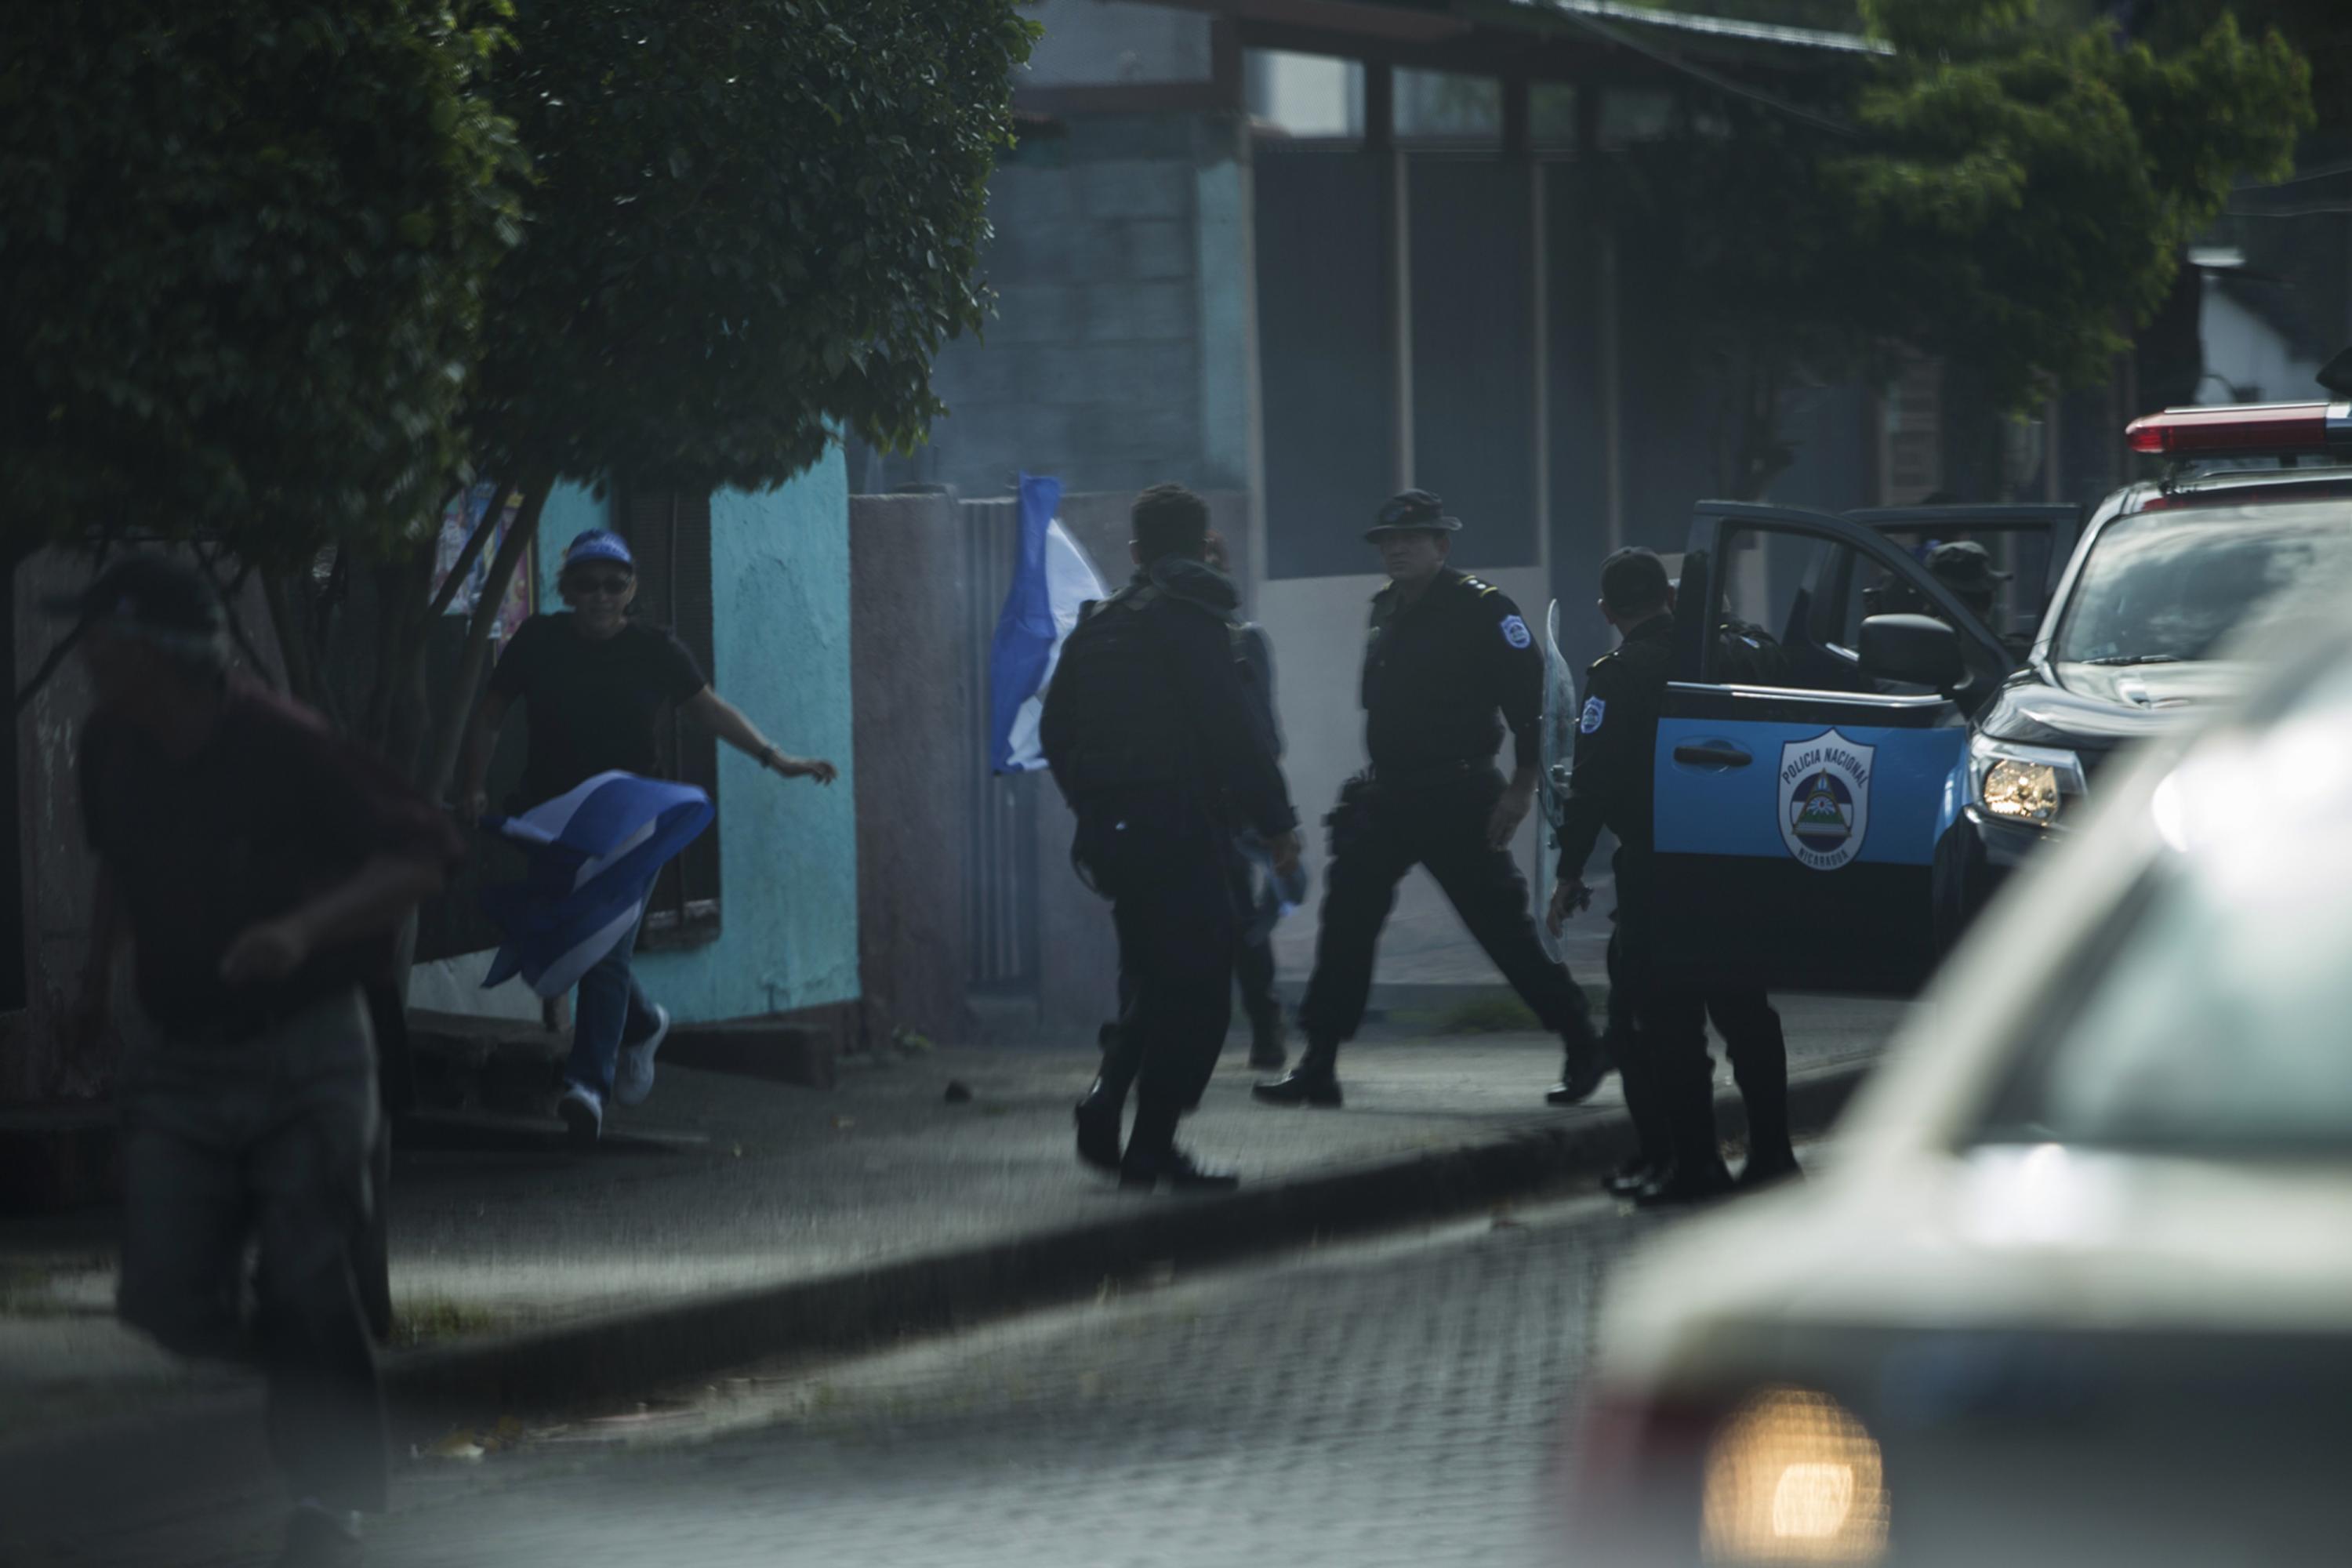 Police dismantled the march organized at the Cristo Rey roundabout in Managua in the afternoon of Saturday, Sep. 29, 2018. The day before, the Nicaraguan Police prohibited protests against Daniel Ortega. Photo Víctor Peña